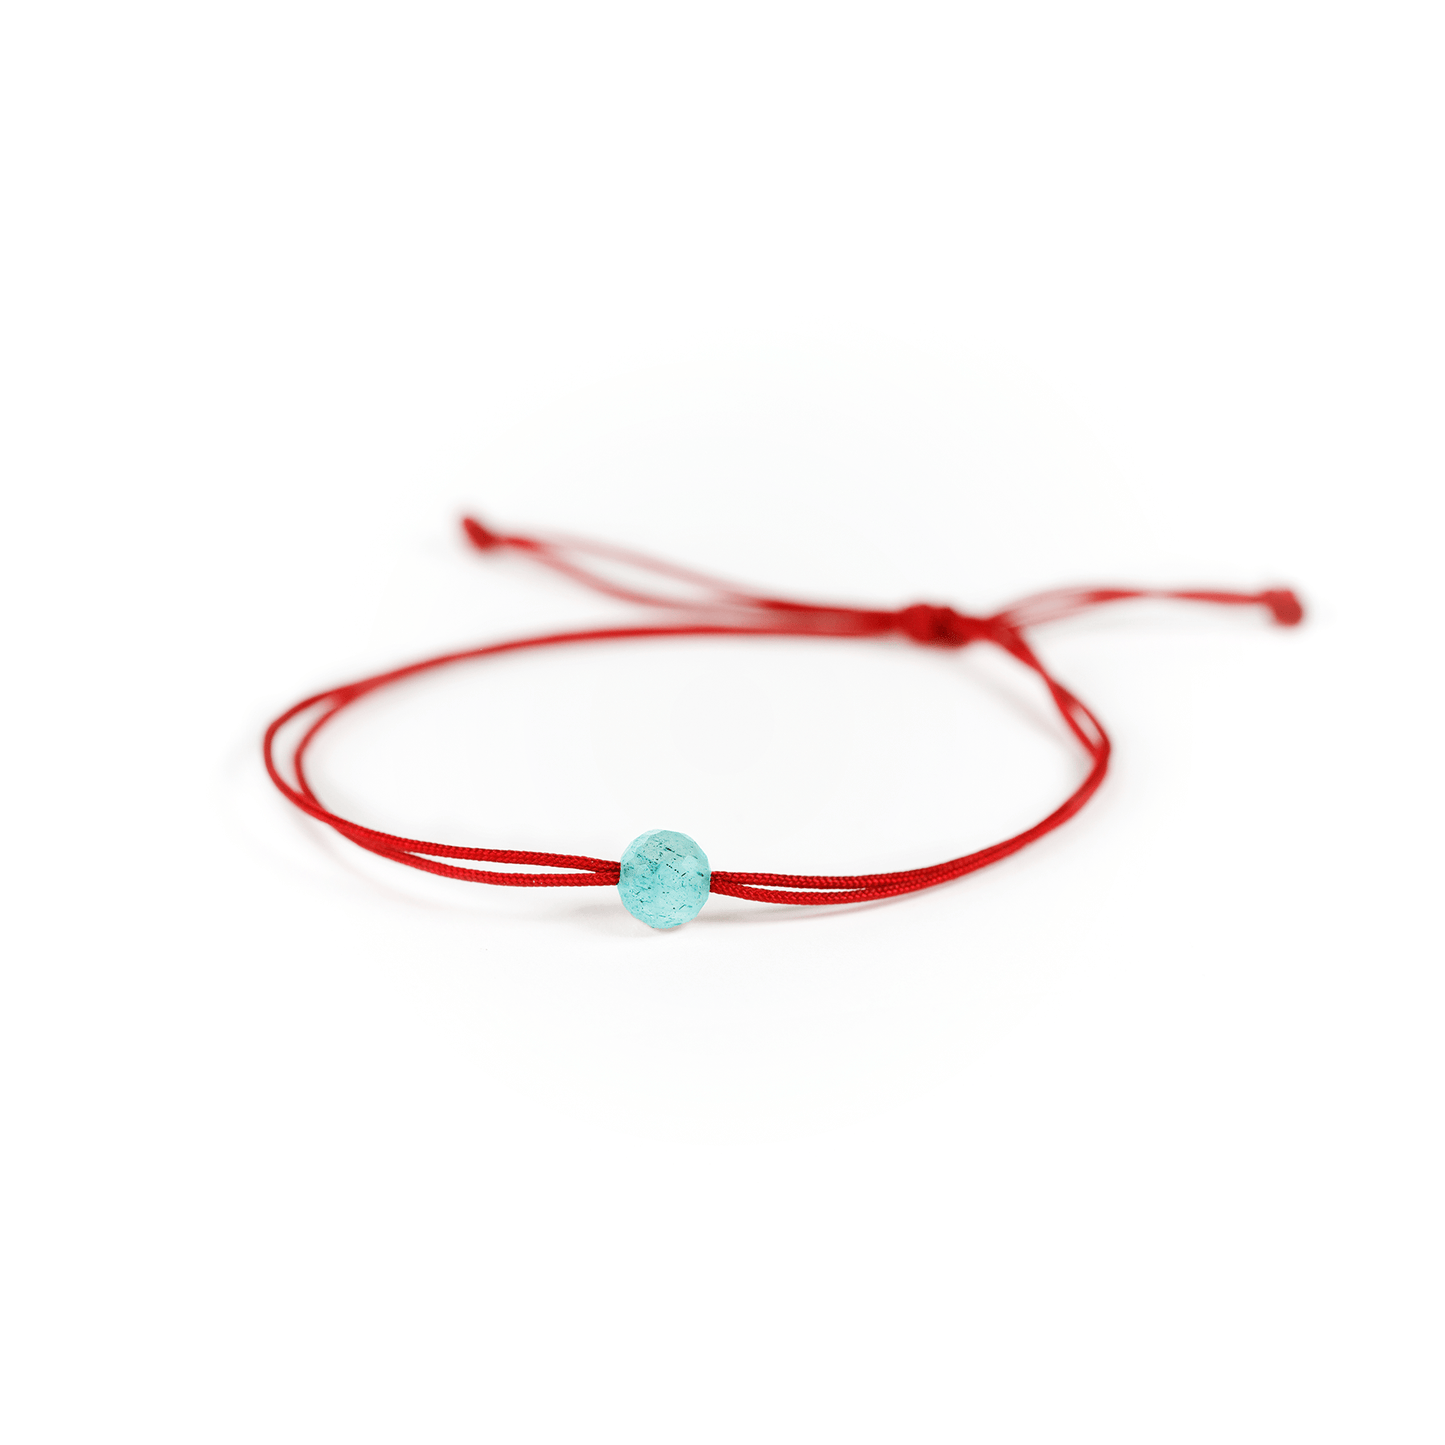 Close up of the turquoise stone with red nylon string.